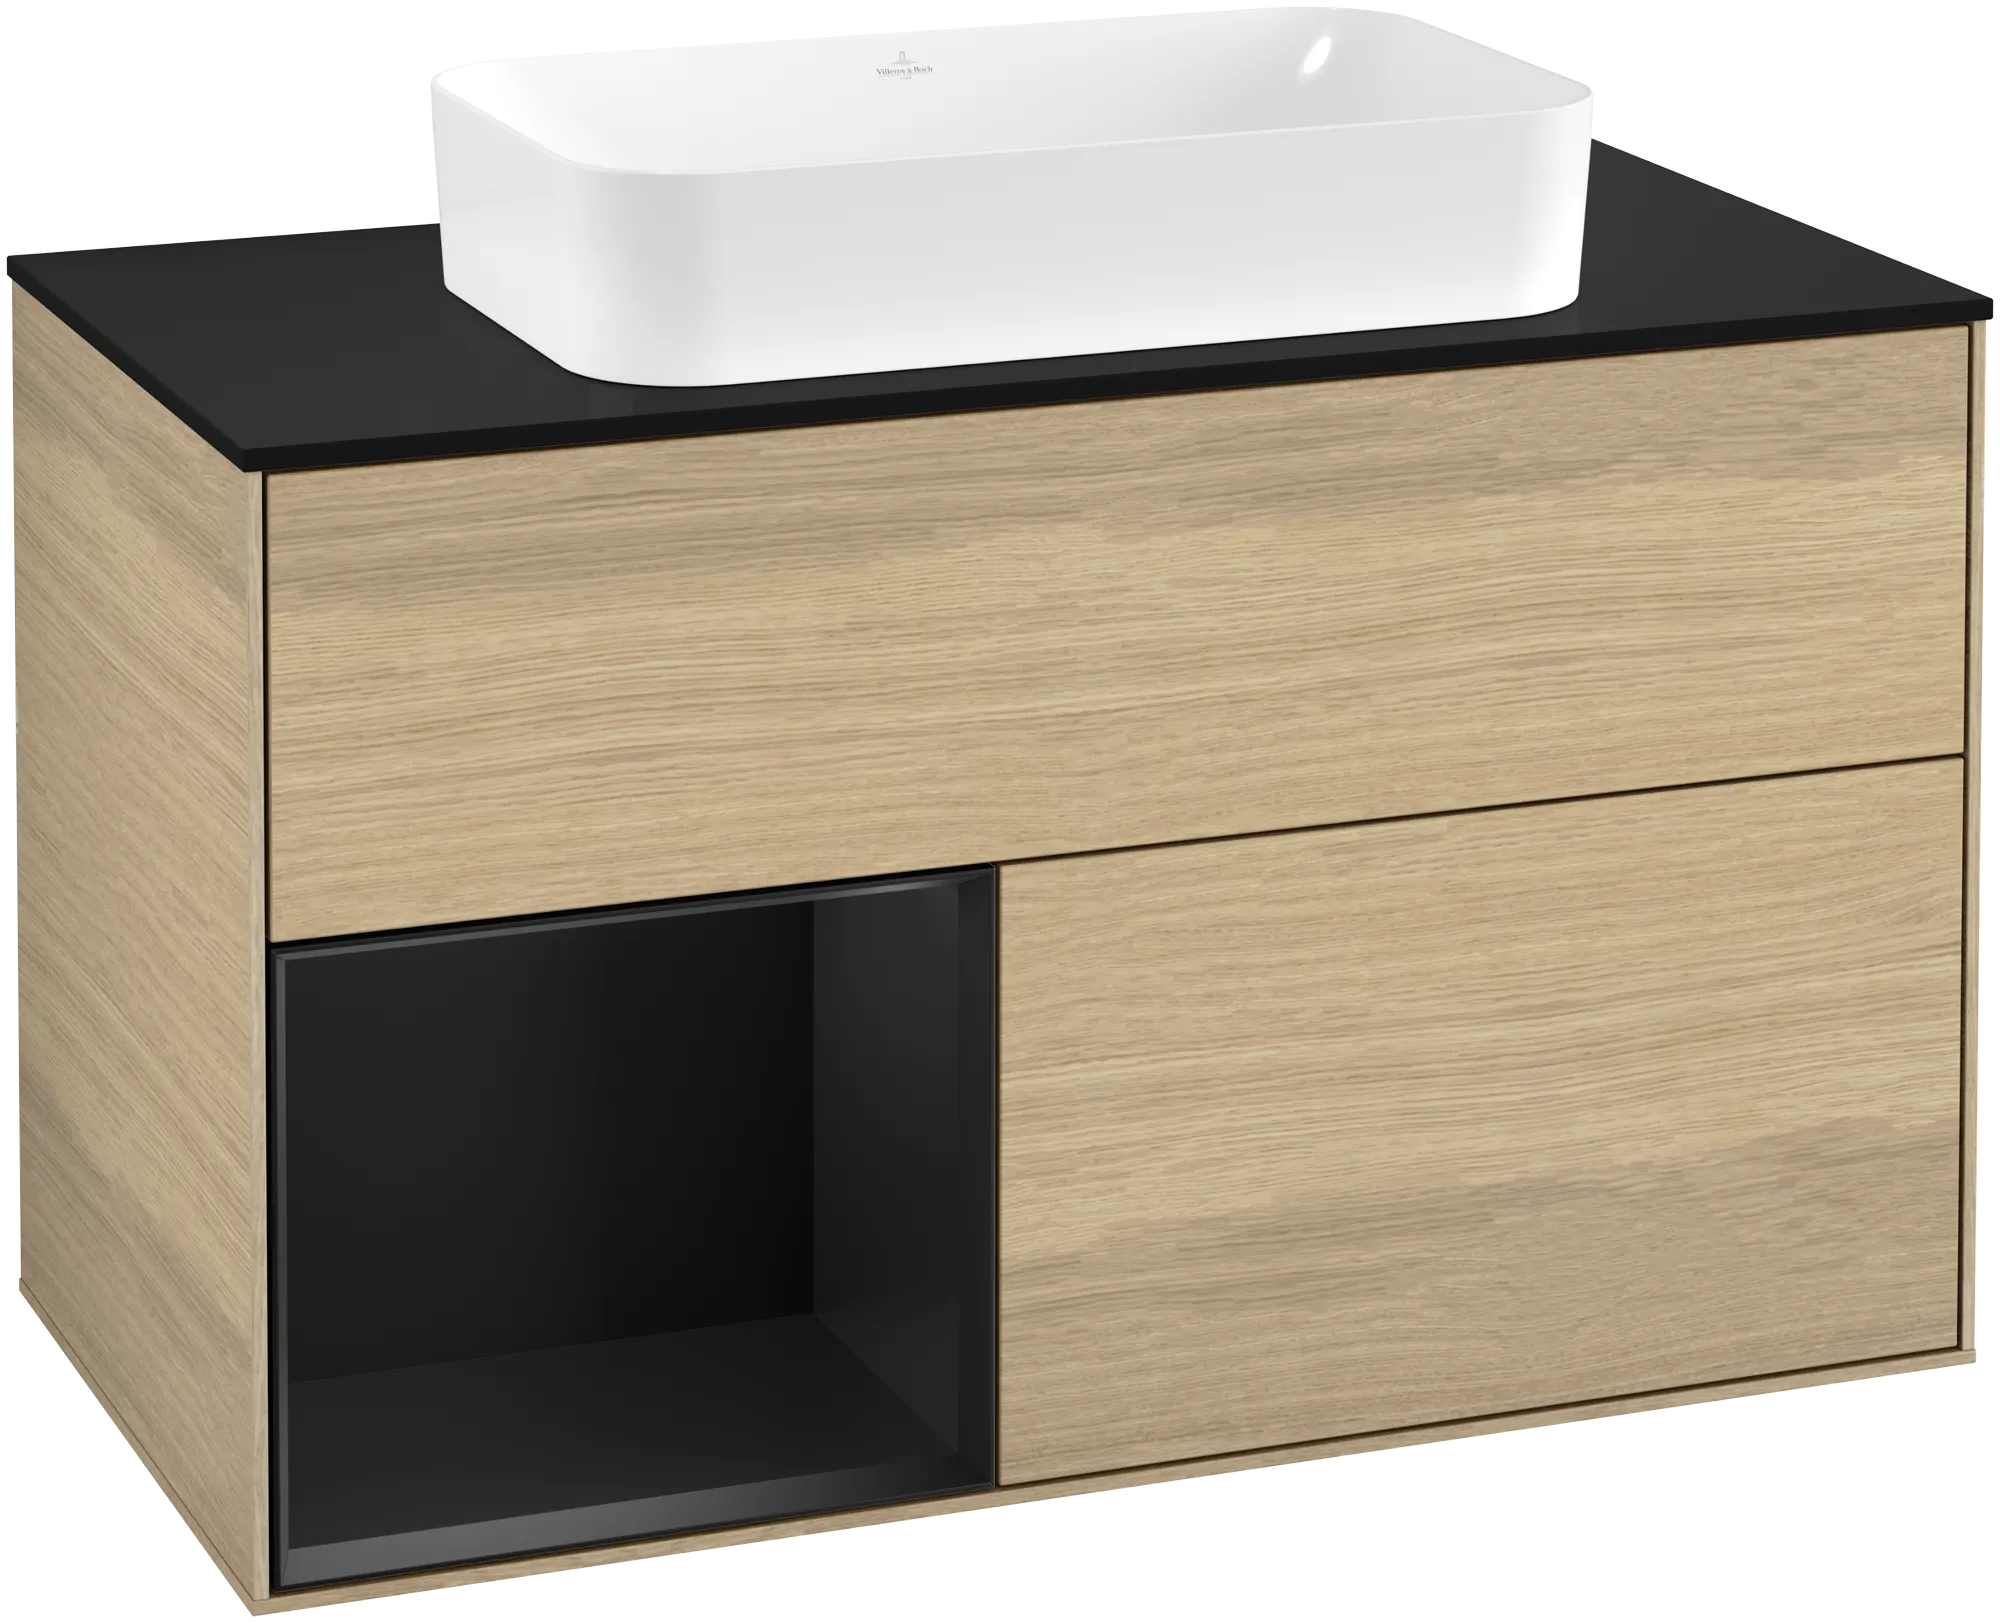 Picture of VILLEROY BOCH Finion Vanity unit, with lighting, 2 pull-out compartments, 1000 x 603 x 501 mm, Oak Veneer / Black Matt Lacquer / Glass Black Matt #G242PDPC